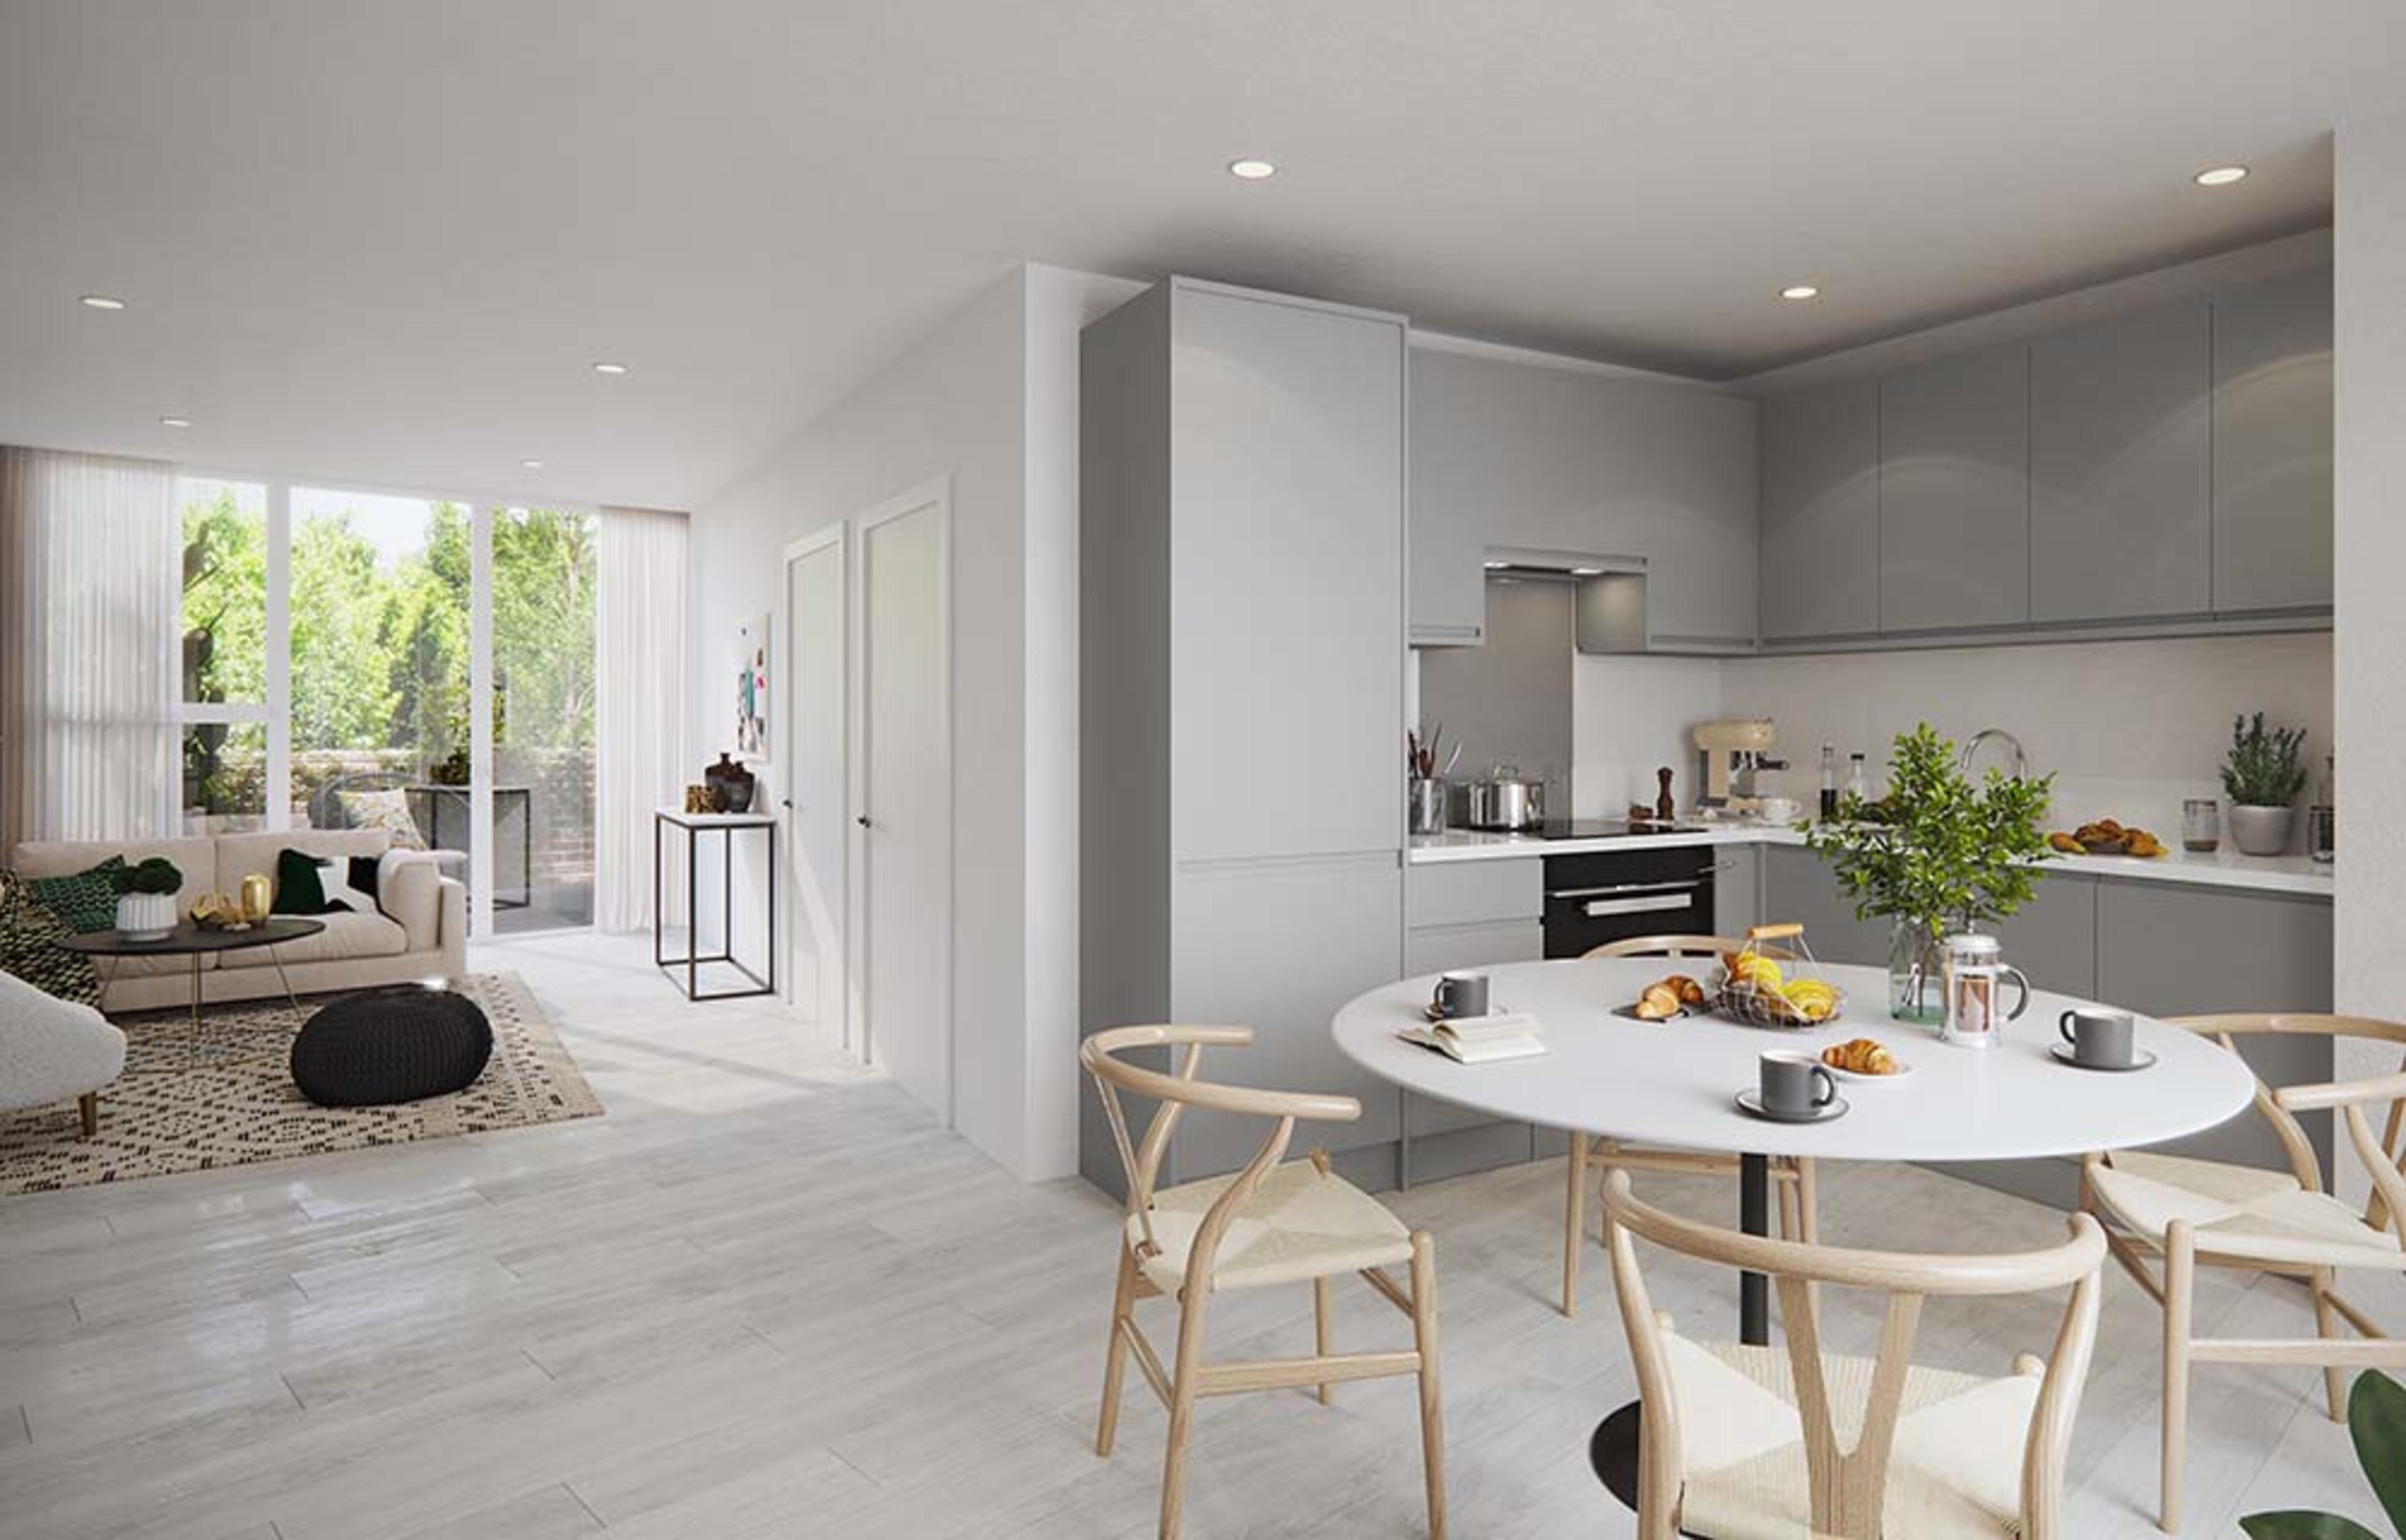 persona-homes-edgewood-mews-flats-for-sale-north-london-kitchen-living-cgi